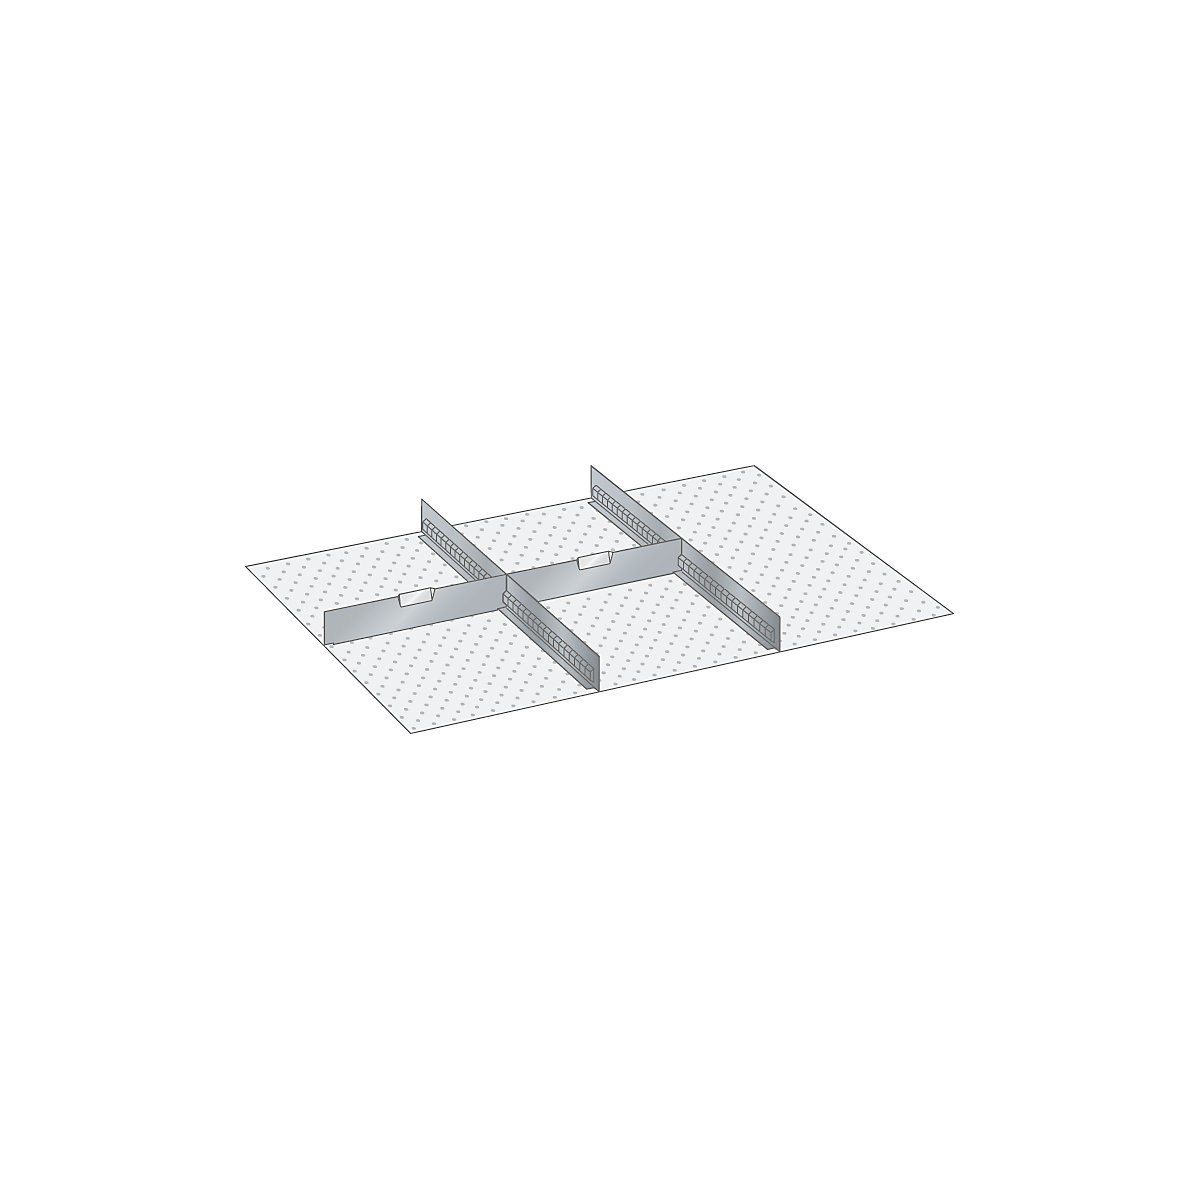 Drawer divider set – LISTA, 2 slotted dividers, 2 partitions, for front height 150 mm-1